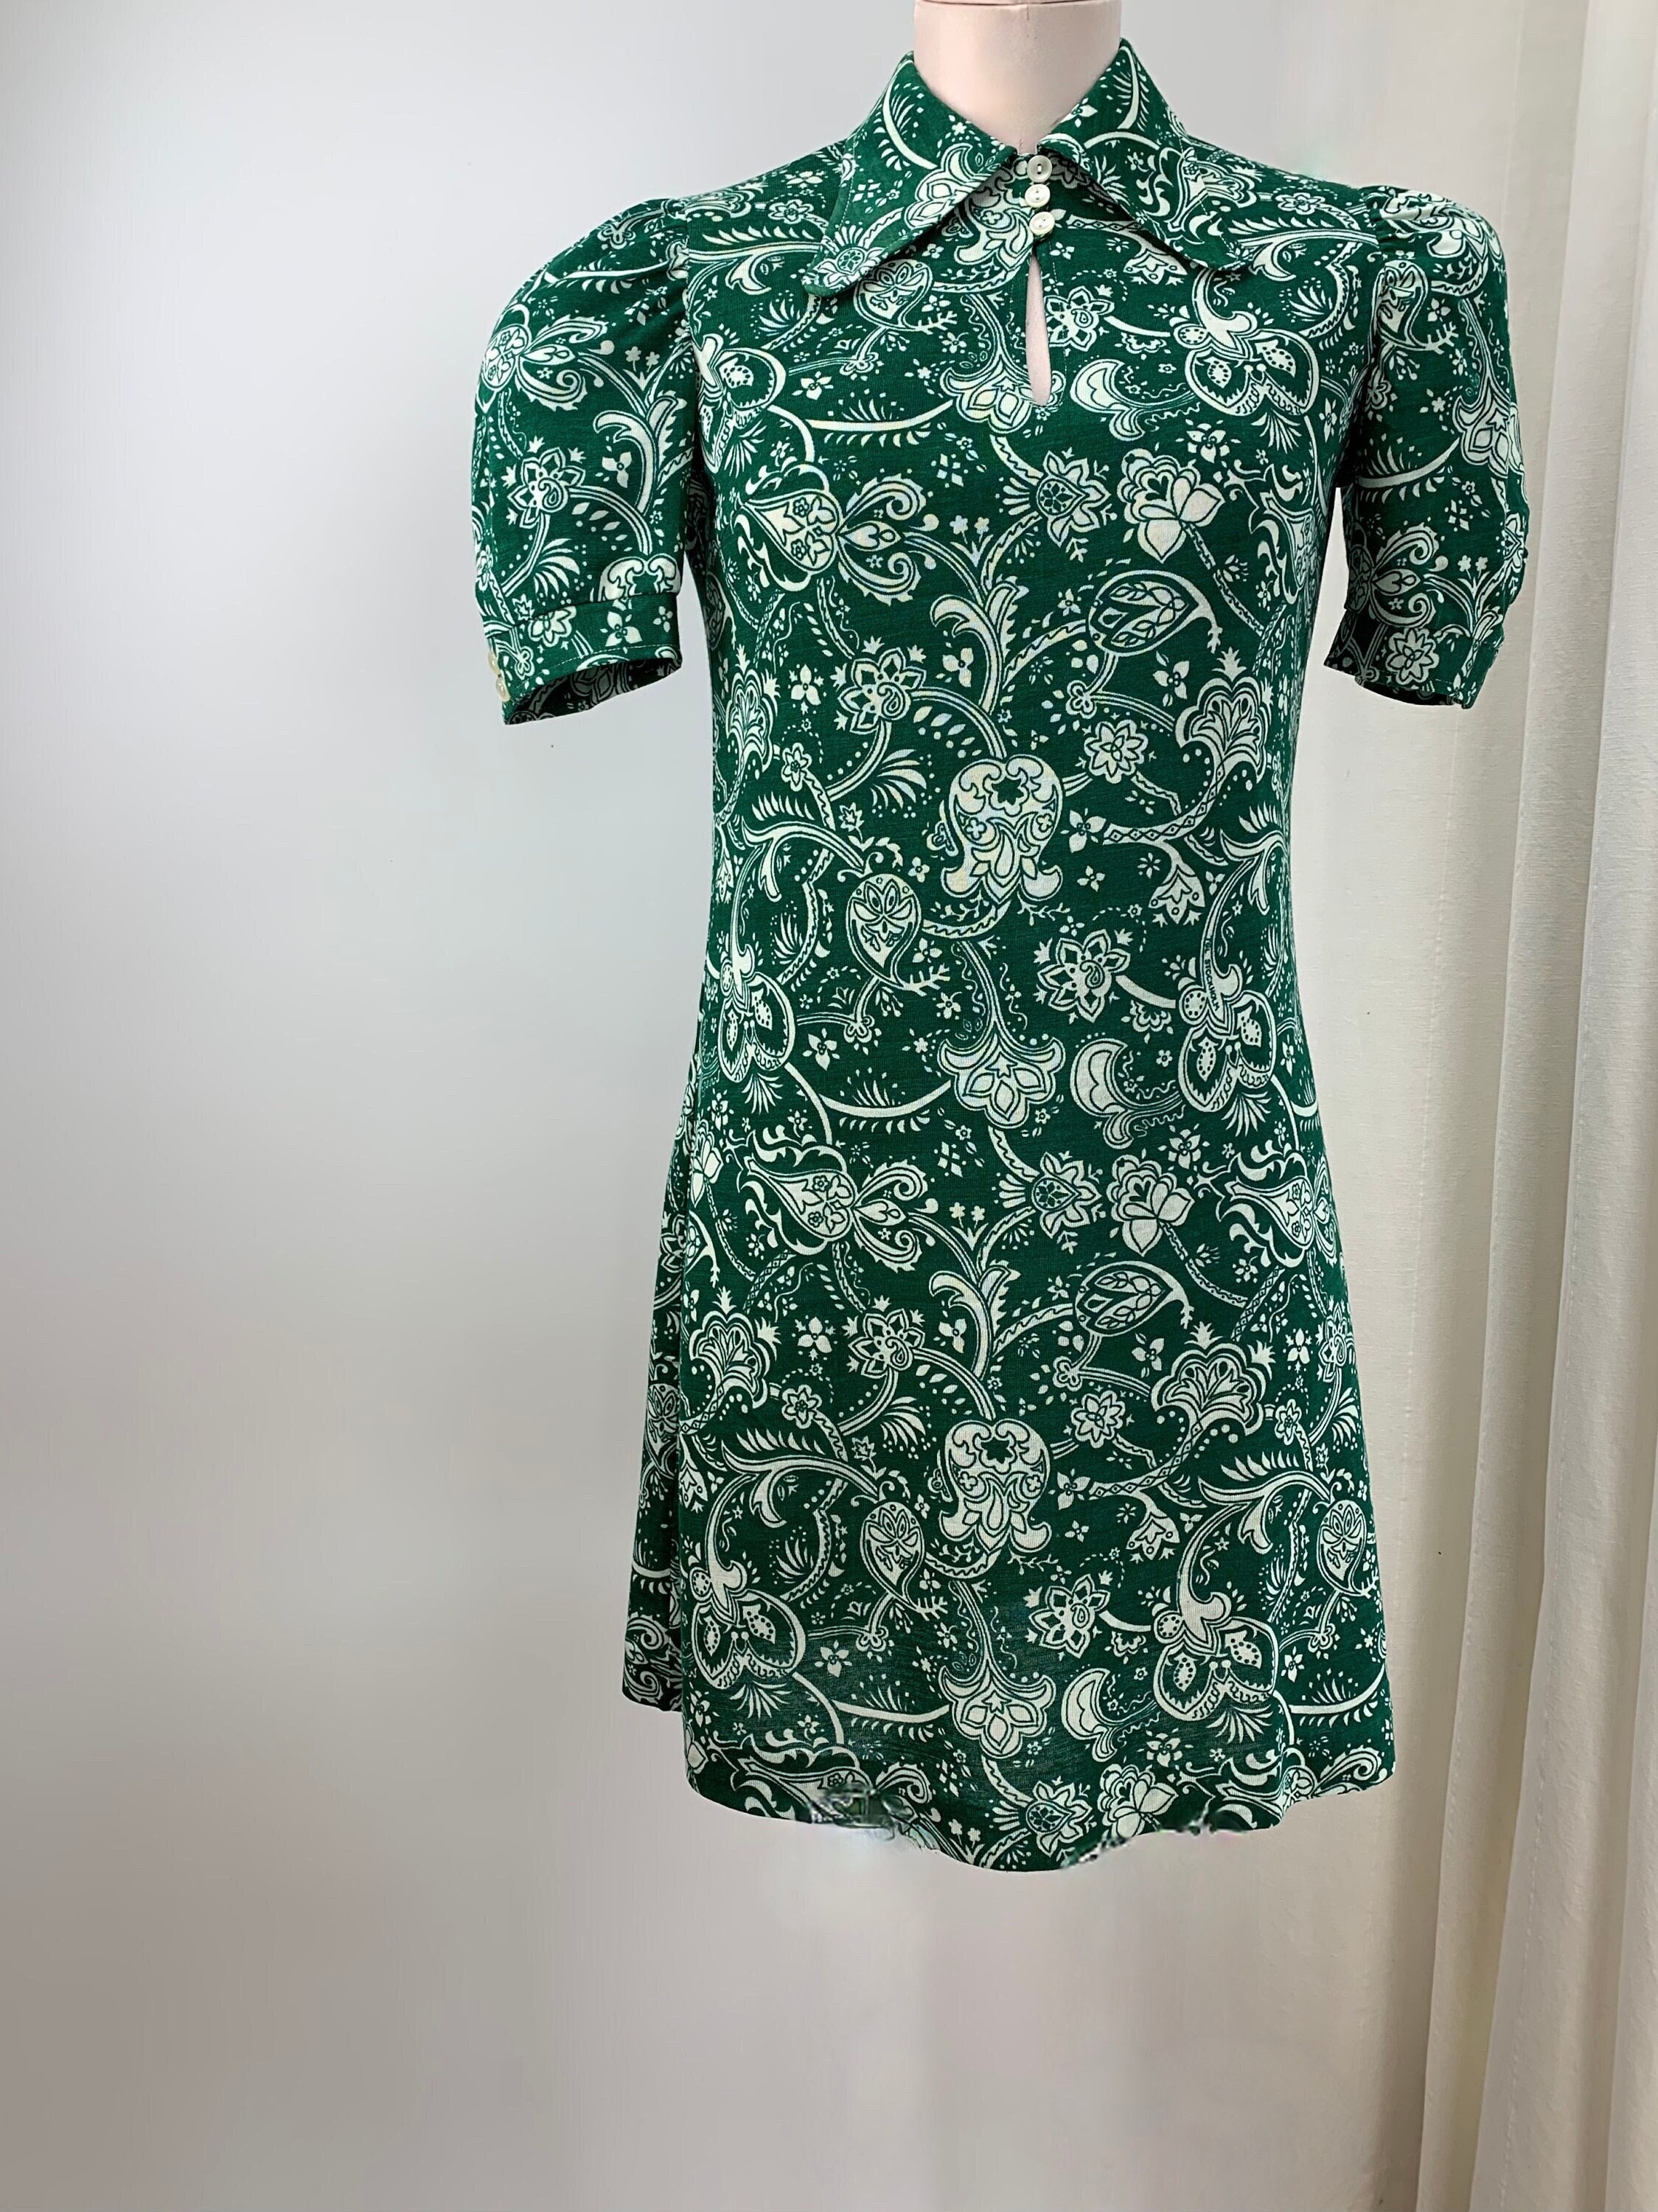 1960's Mini Shirt Dress - Cotton Blended Jersey Knit Green Paisley Puffy Sleeves Made in Finland Nos/Dead-stock Size Medium